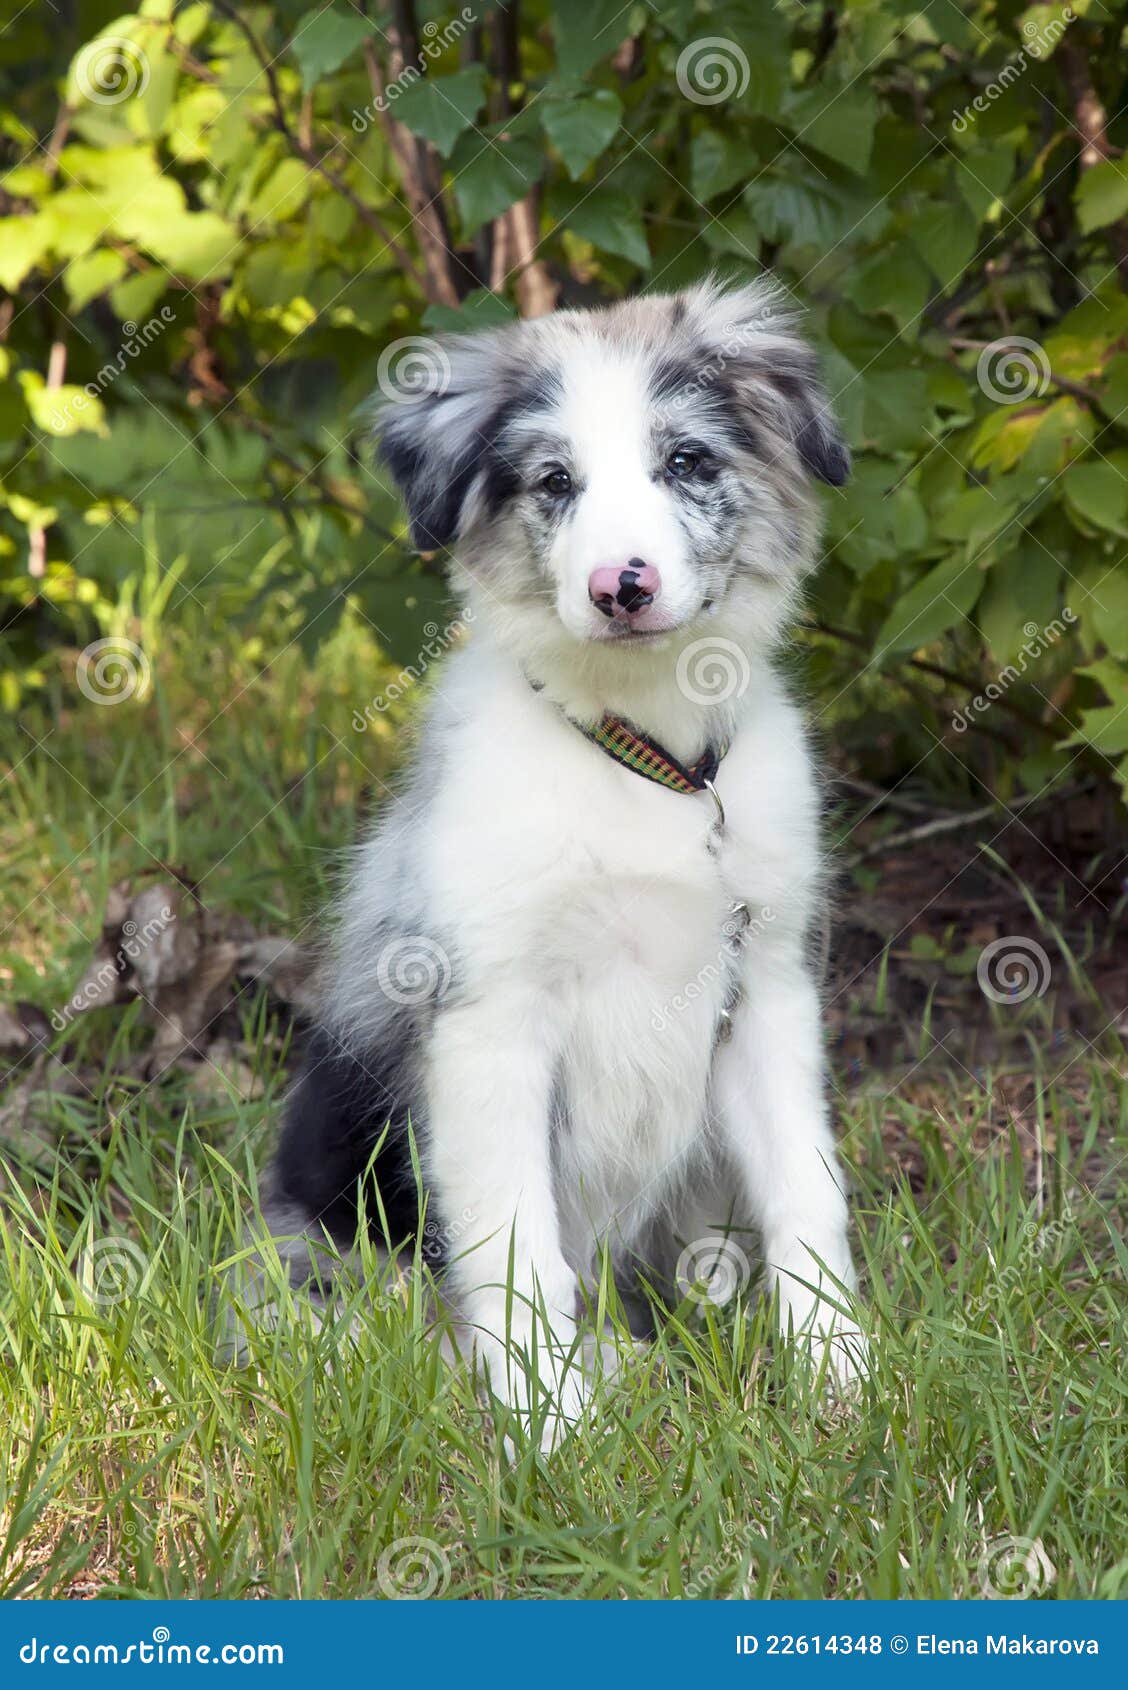 vurdere Uhøfligt tage Border Collie Puppy in Grass Stock Photo - Image of purebred, cute: 22614348